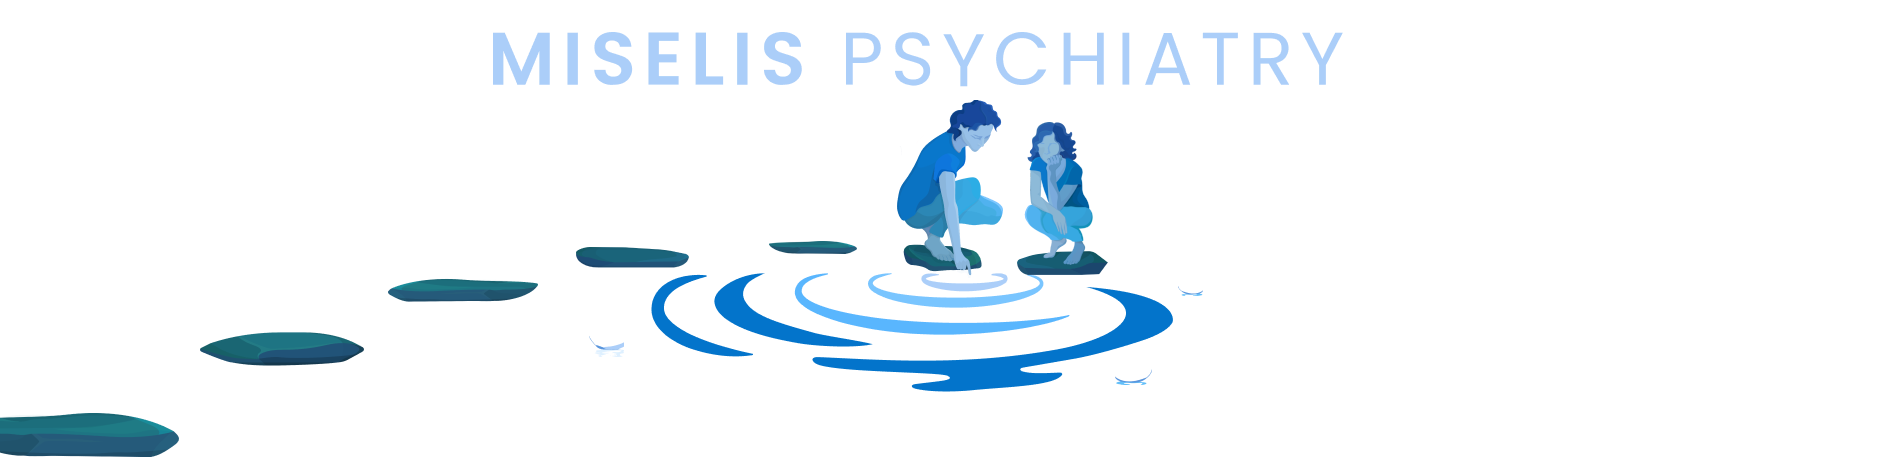 Miselis Psychiatry - An illustration of two persons, sitting on rocks over the river touching the water